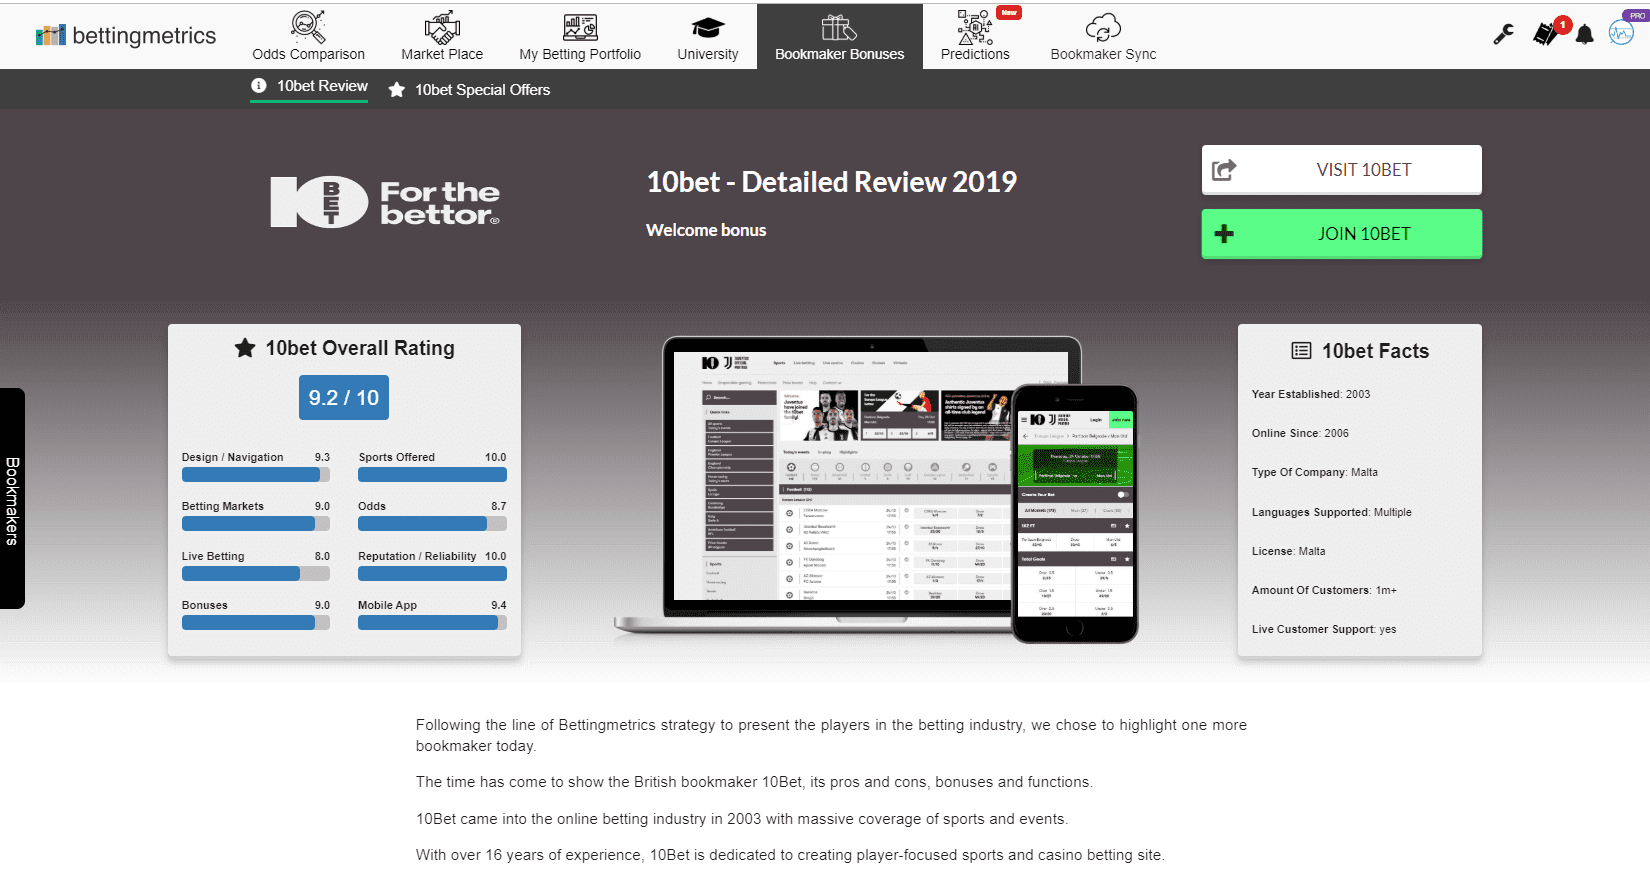 Product update 4.10.2019 - new style of all bookmaker reviews